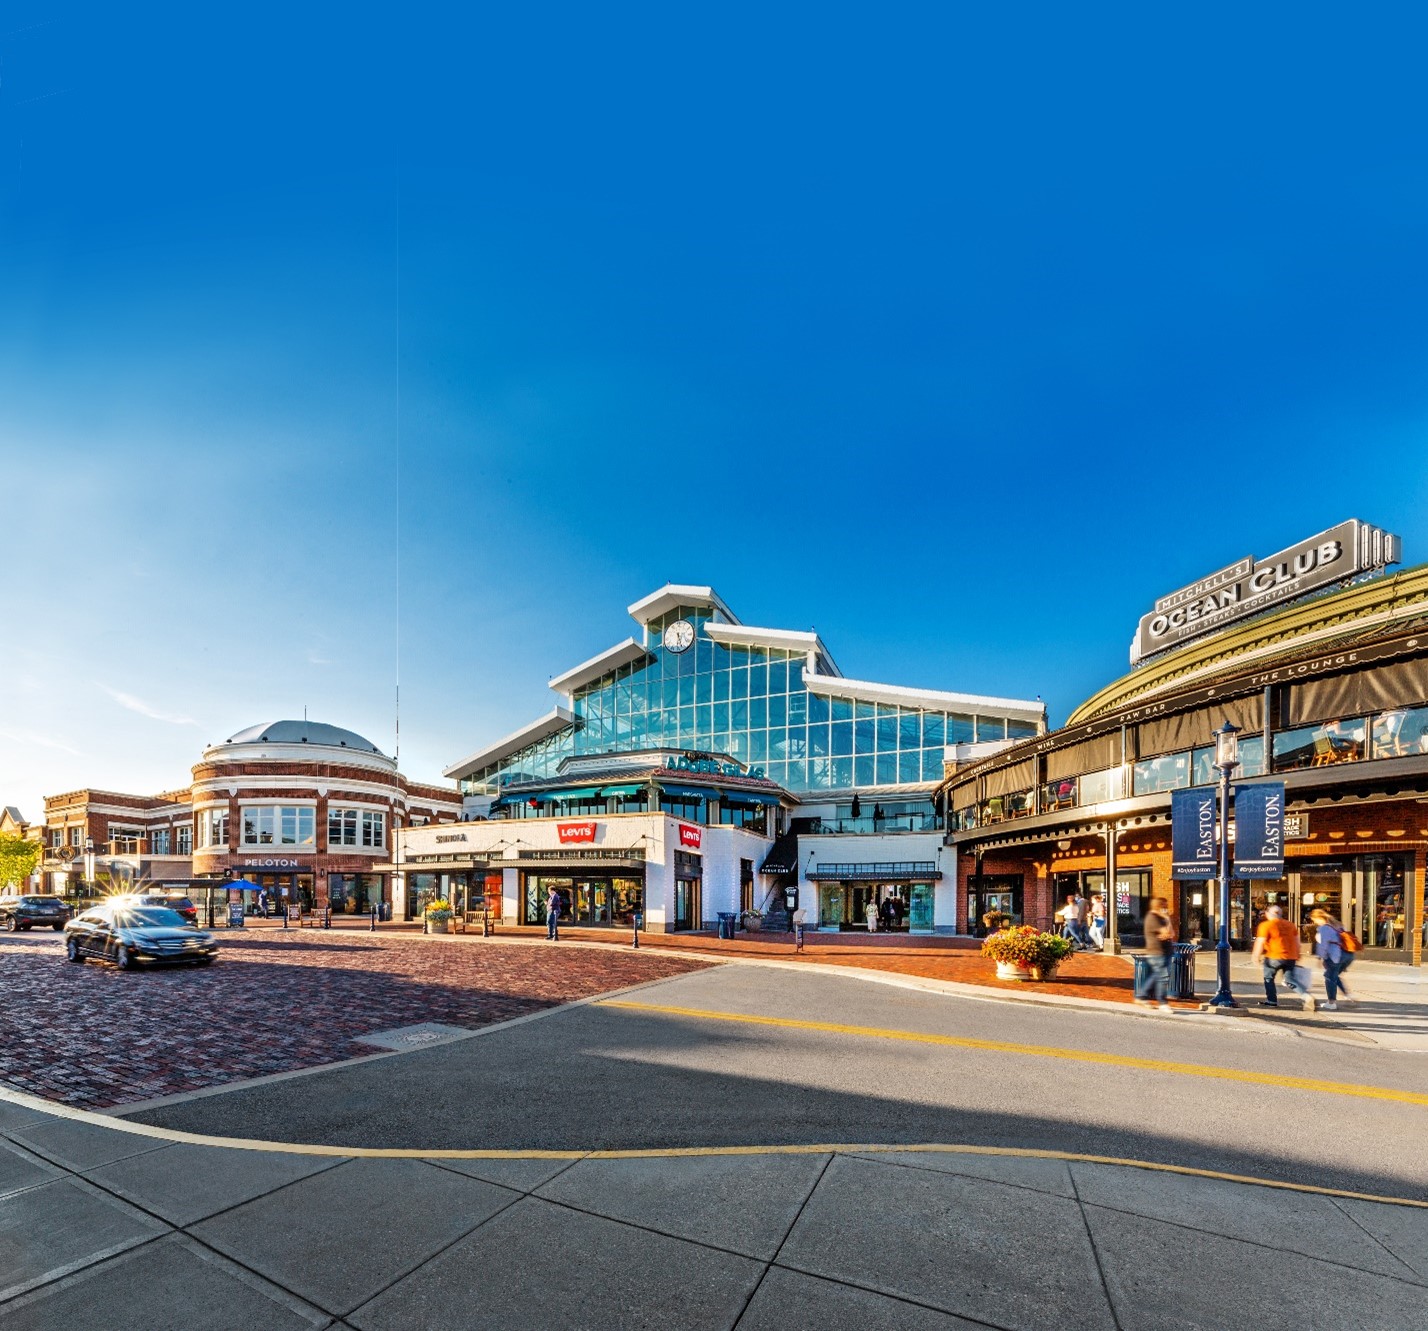 Street view of Easton Town Center in Columbus, OH